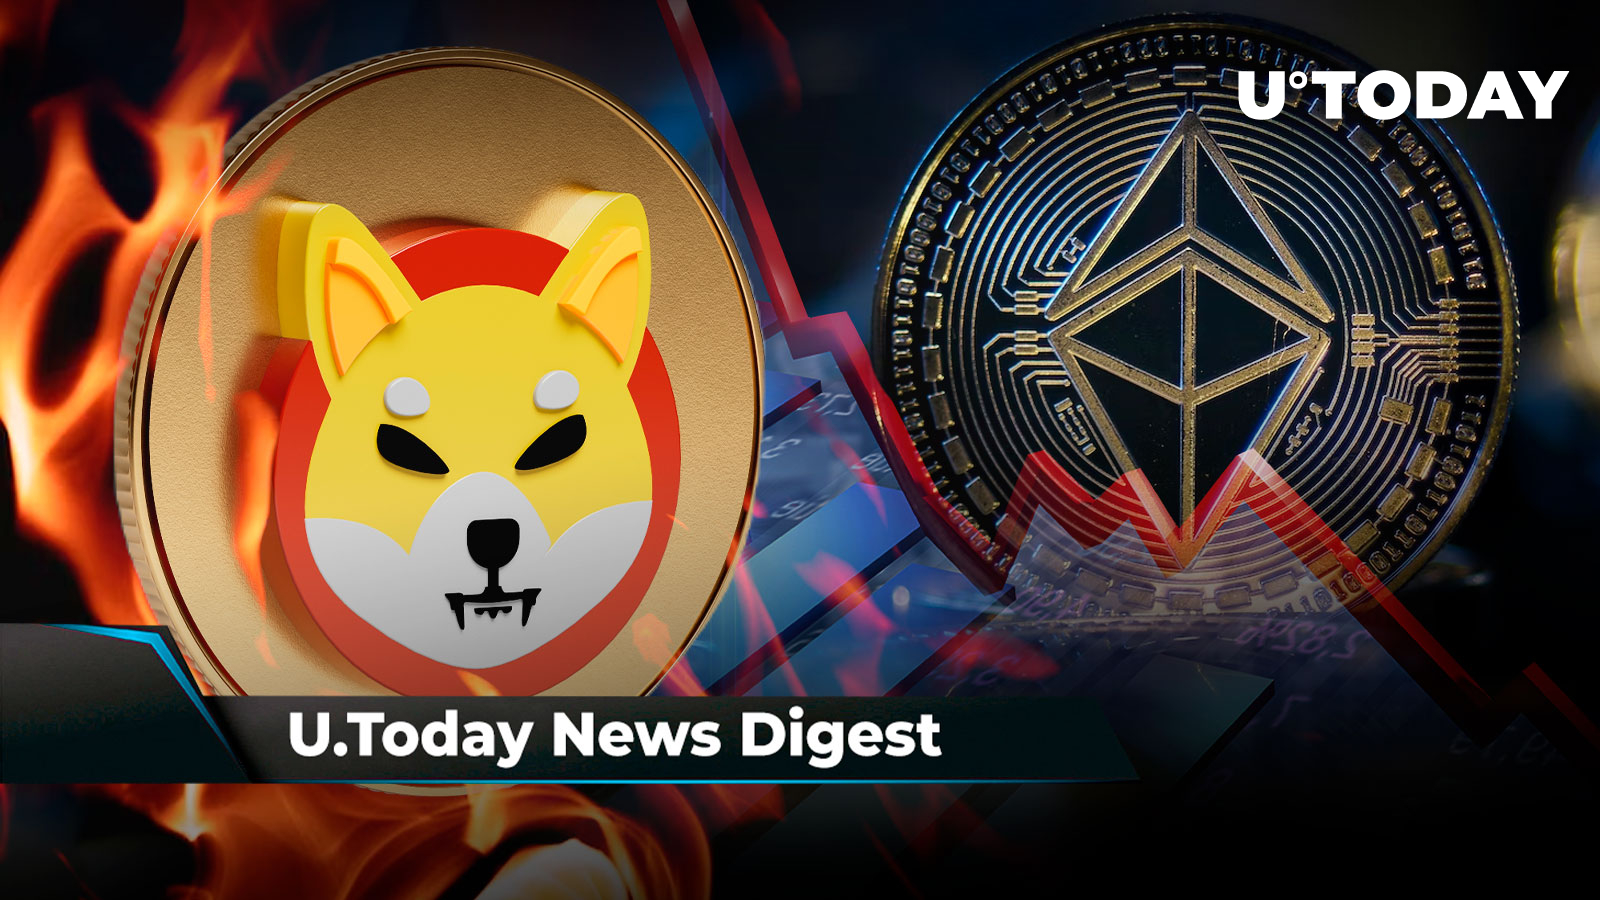 SHIB Price at Critical Point, ETH Drops to Important Support Level, New SHIB Burn Portal Detected: Crypto News Digest by U.Today